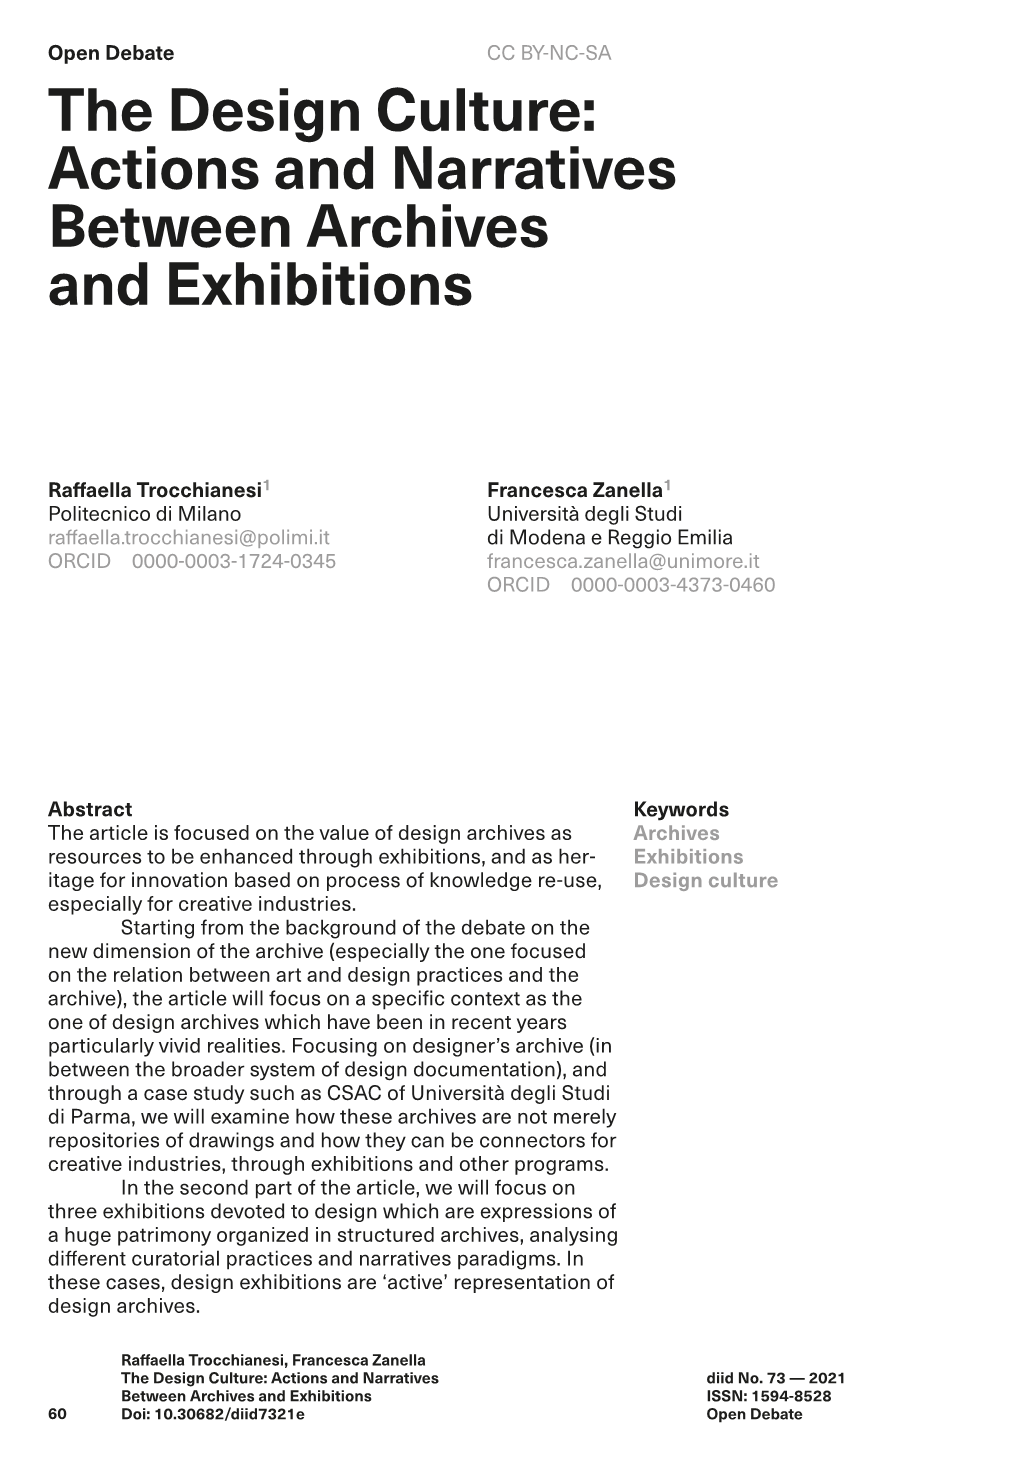 Actions and Narratives Between Archives and Exhibitions